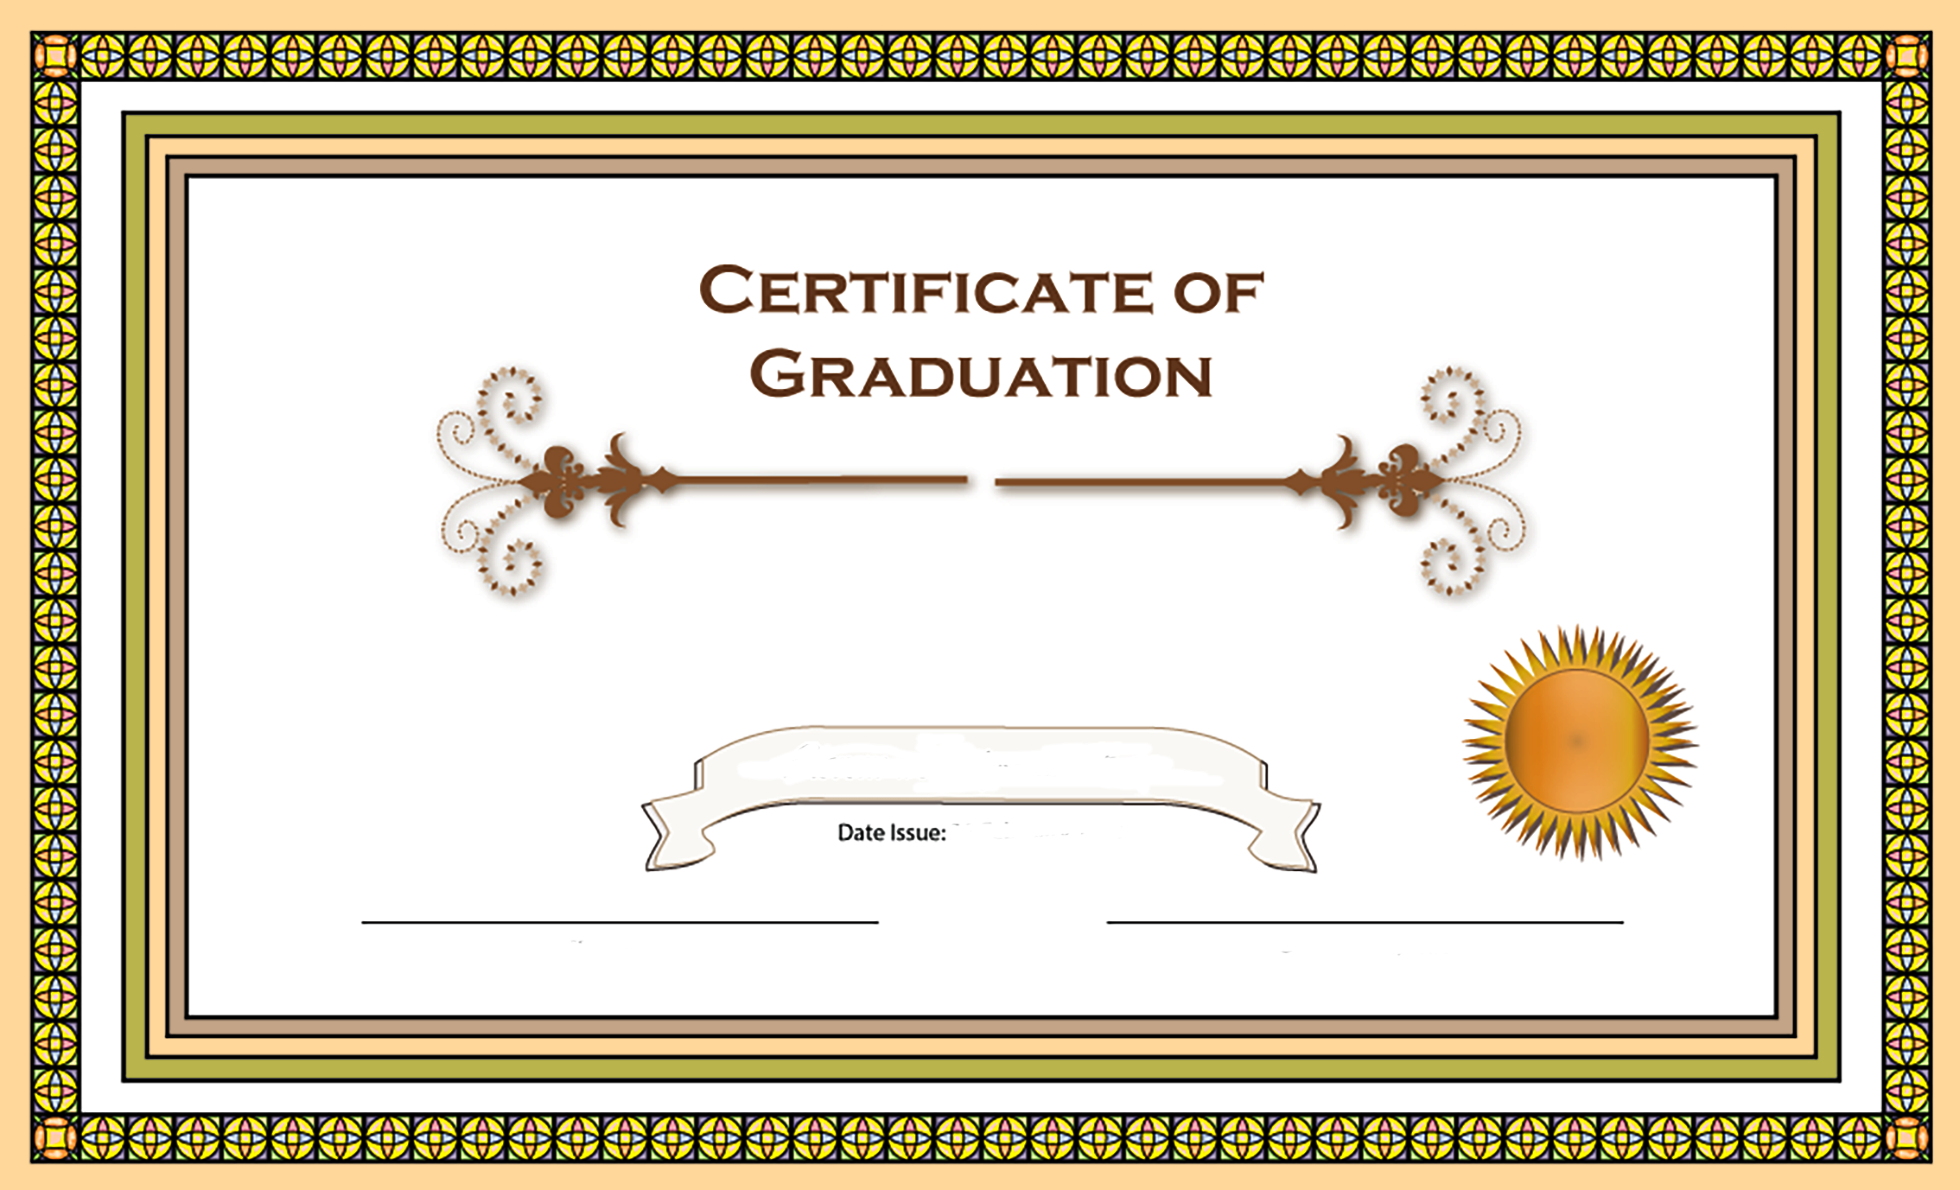 Diploma Frames: The Complete Guide to Framing Your (Fake) Diploma